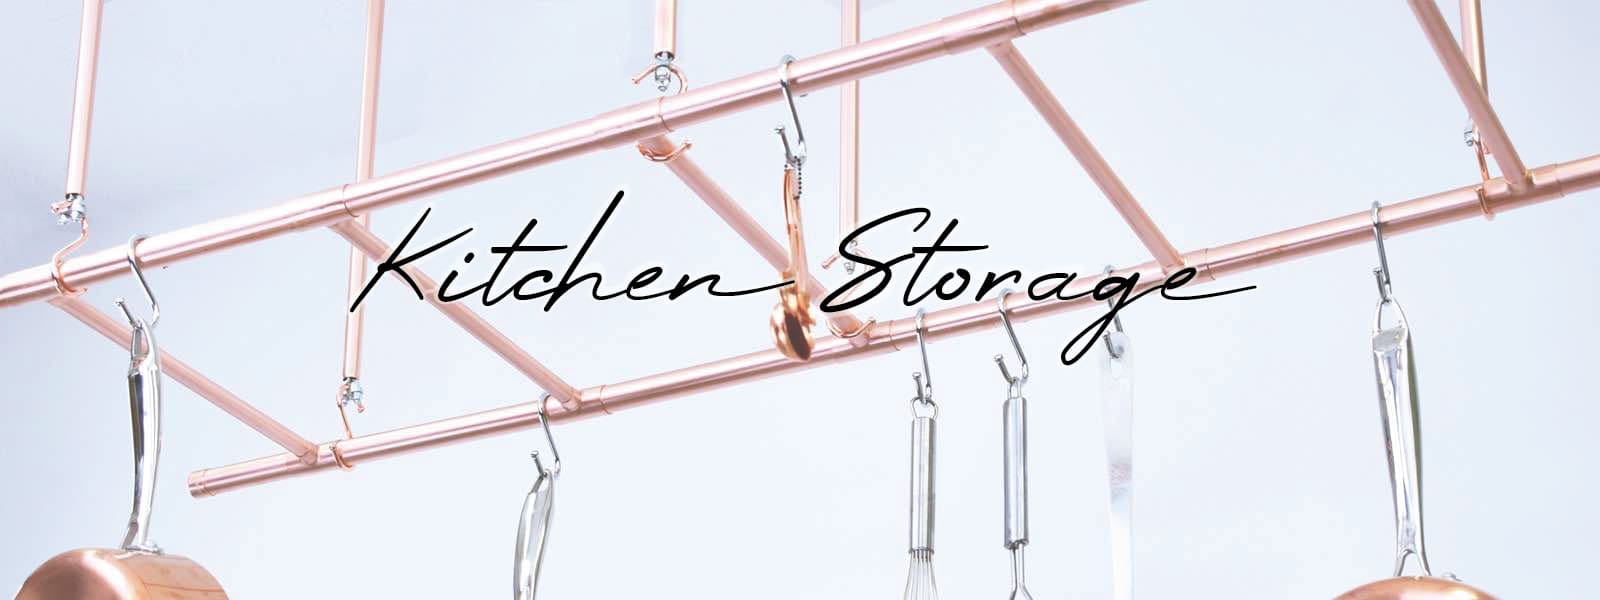 copper hanging rails and racks, kitchen storage solution made in England